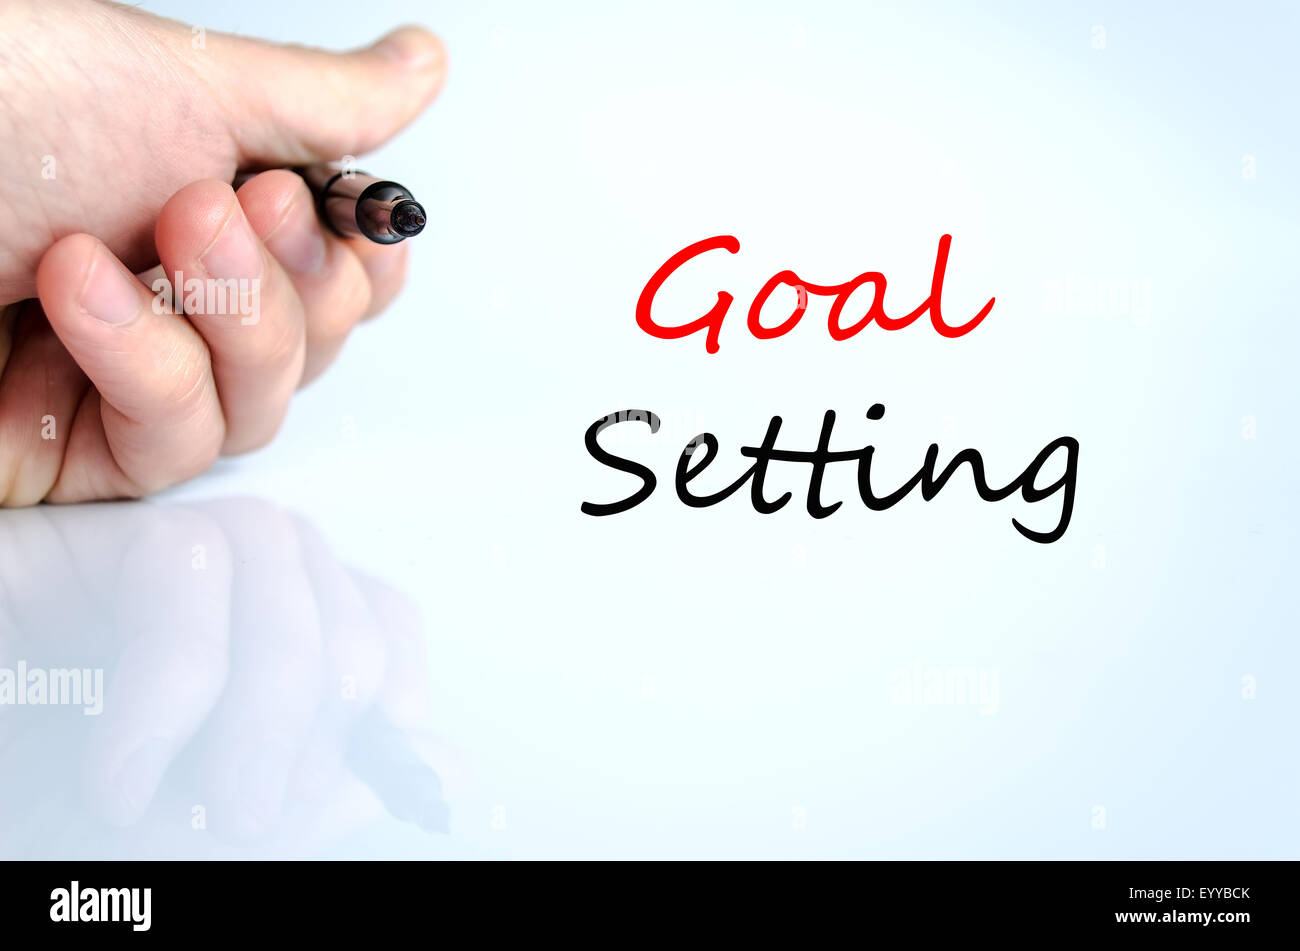 Goal Setting Text Concept Isolated Over White Background Stock Photo Alamy